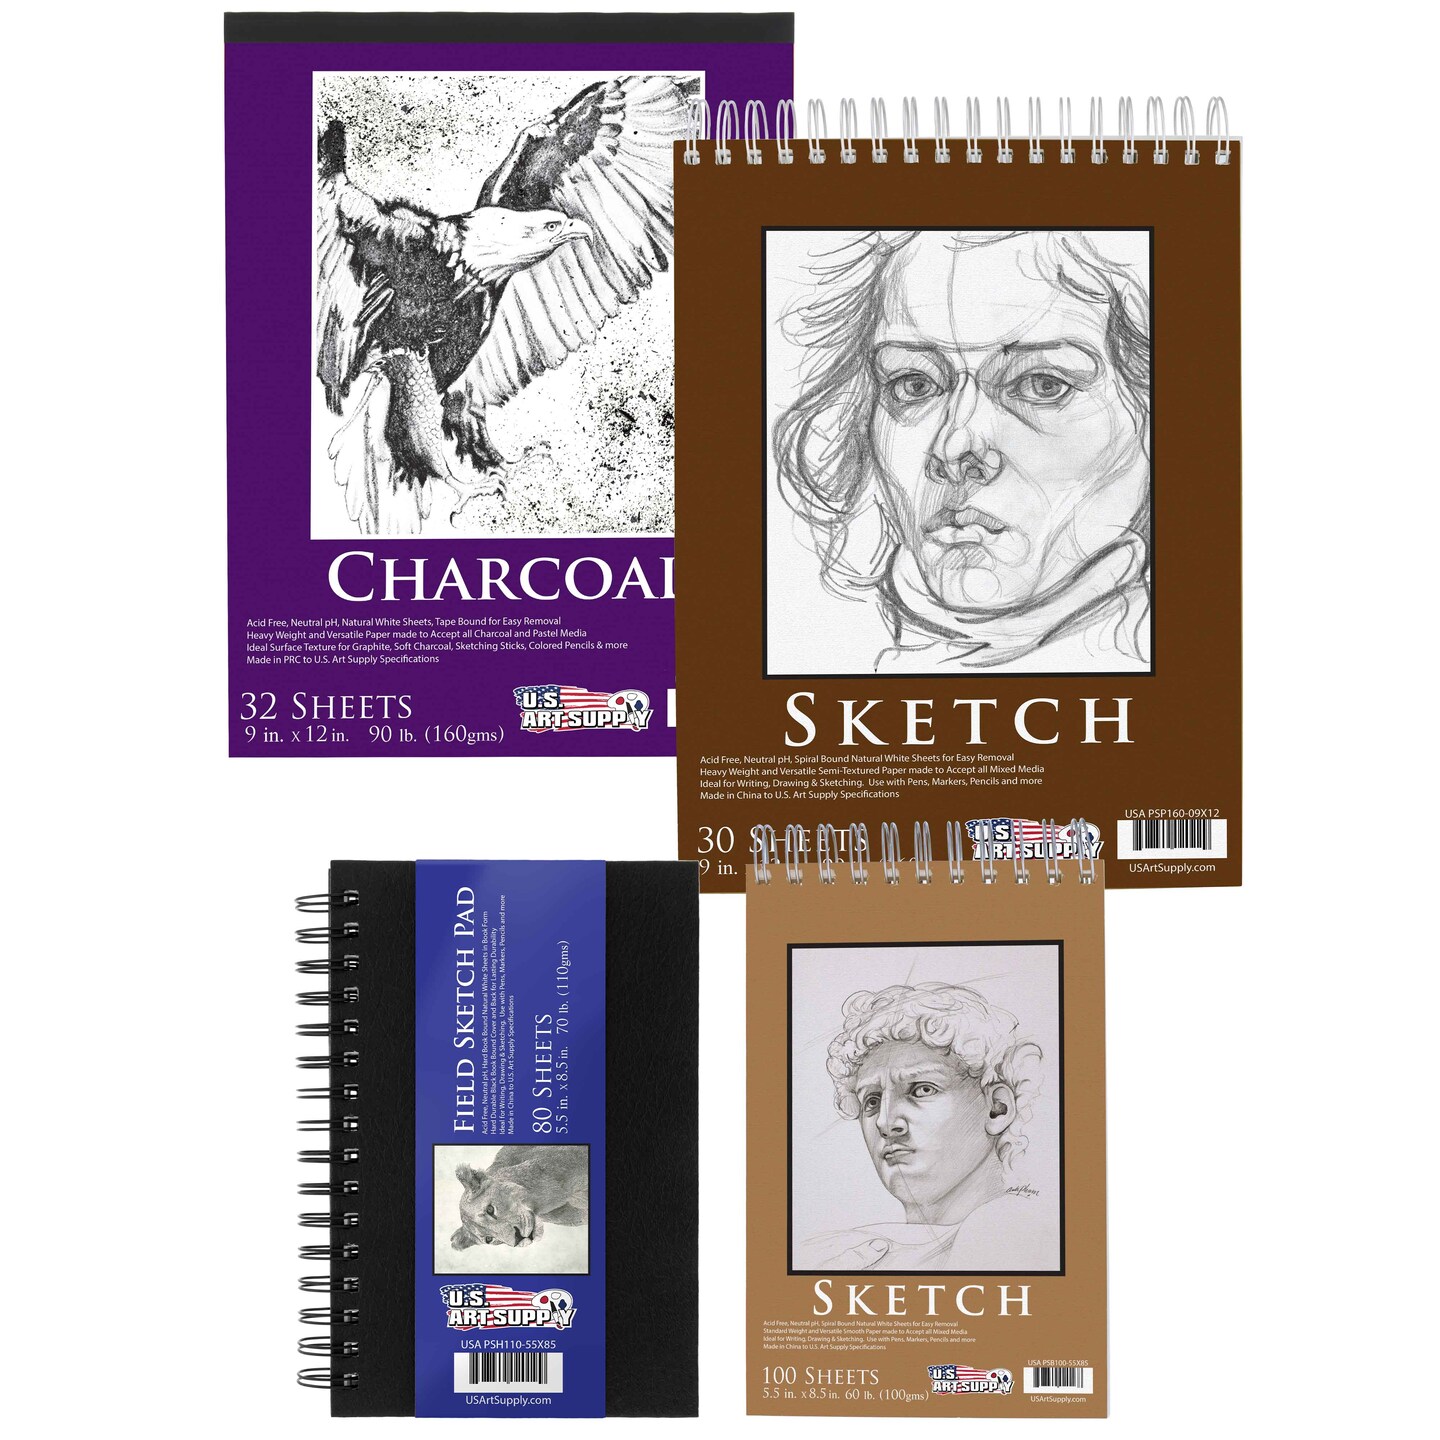 Sketch Book, book for sketches, hard cover, pencil, pastel, pen